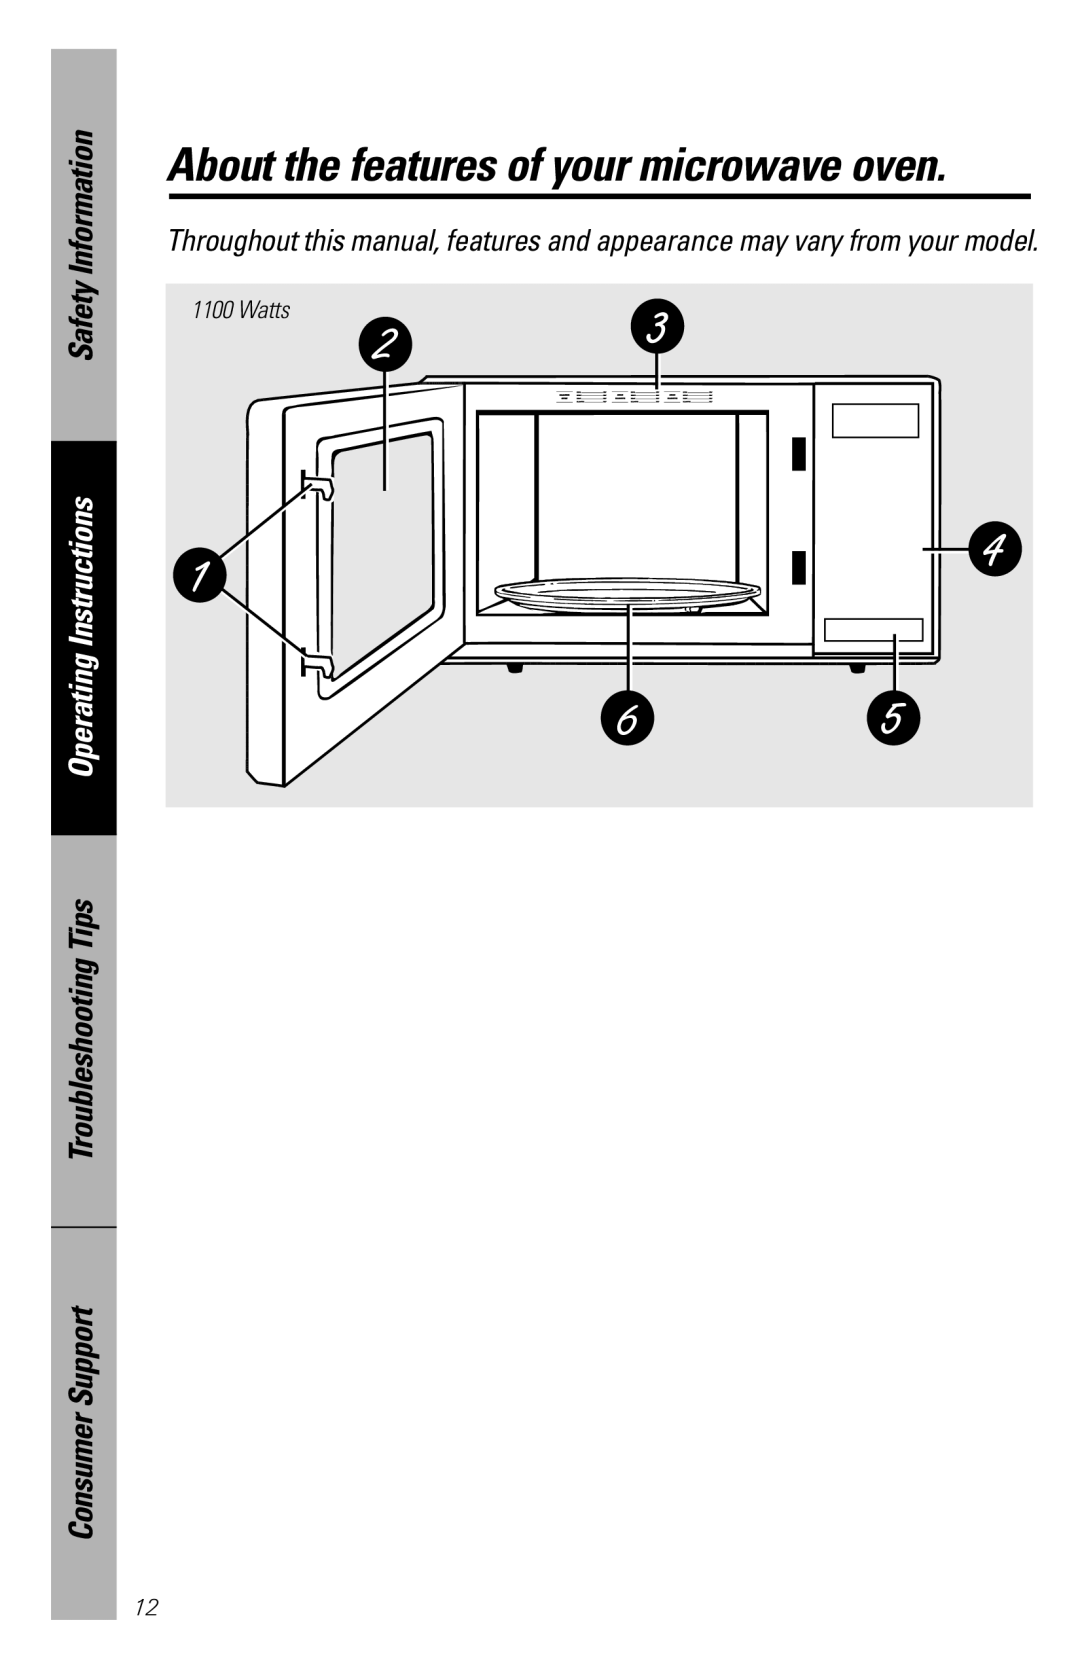 GE JES1334SD owner manual About the features of your microwave oven, Safety Information, Operating Instructions 